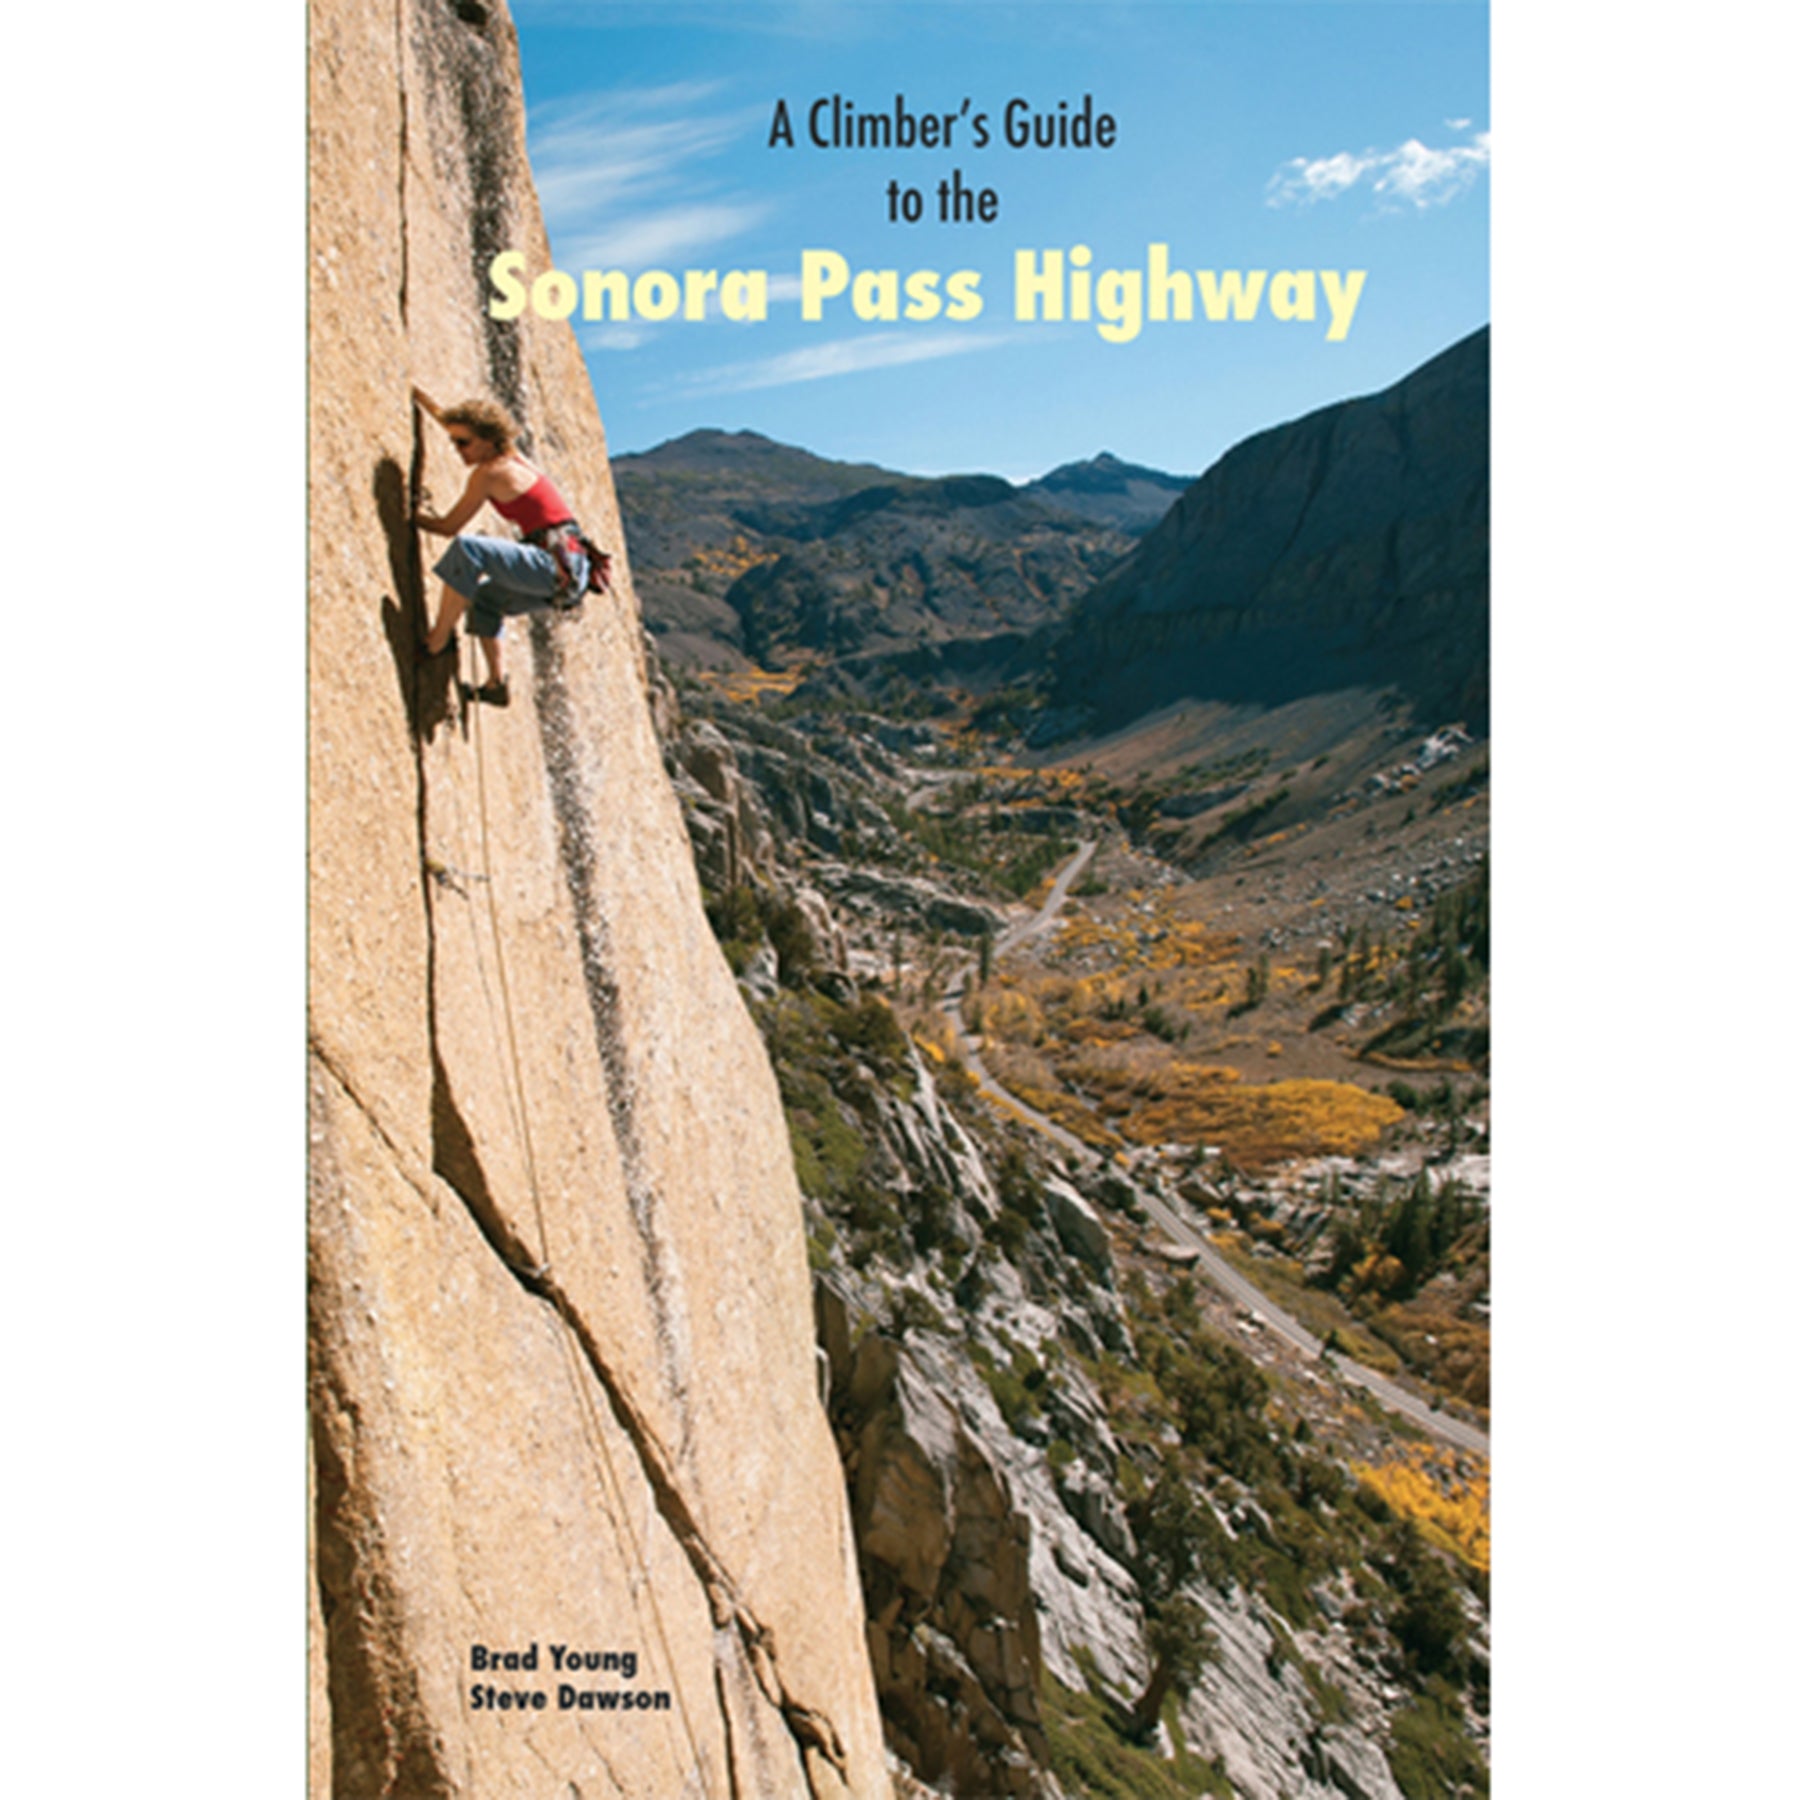 a women leads steep rock on the cover of the climbers guide to sonora pass highway